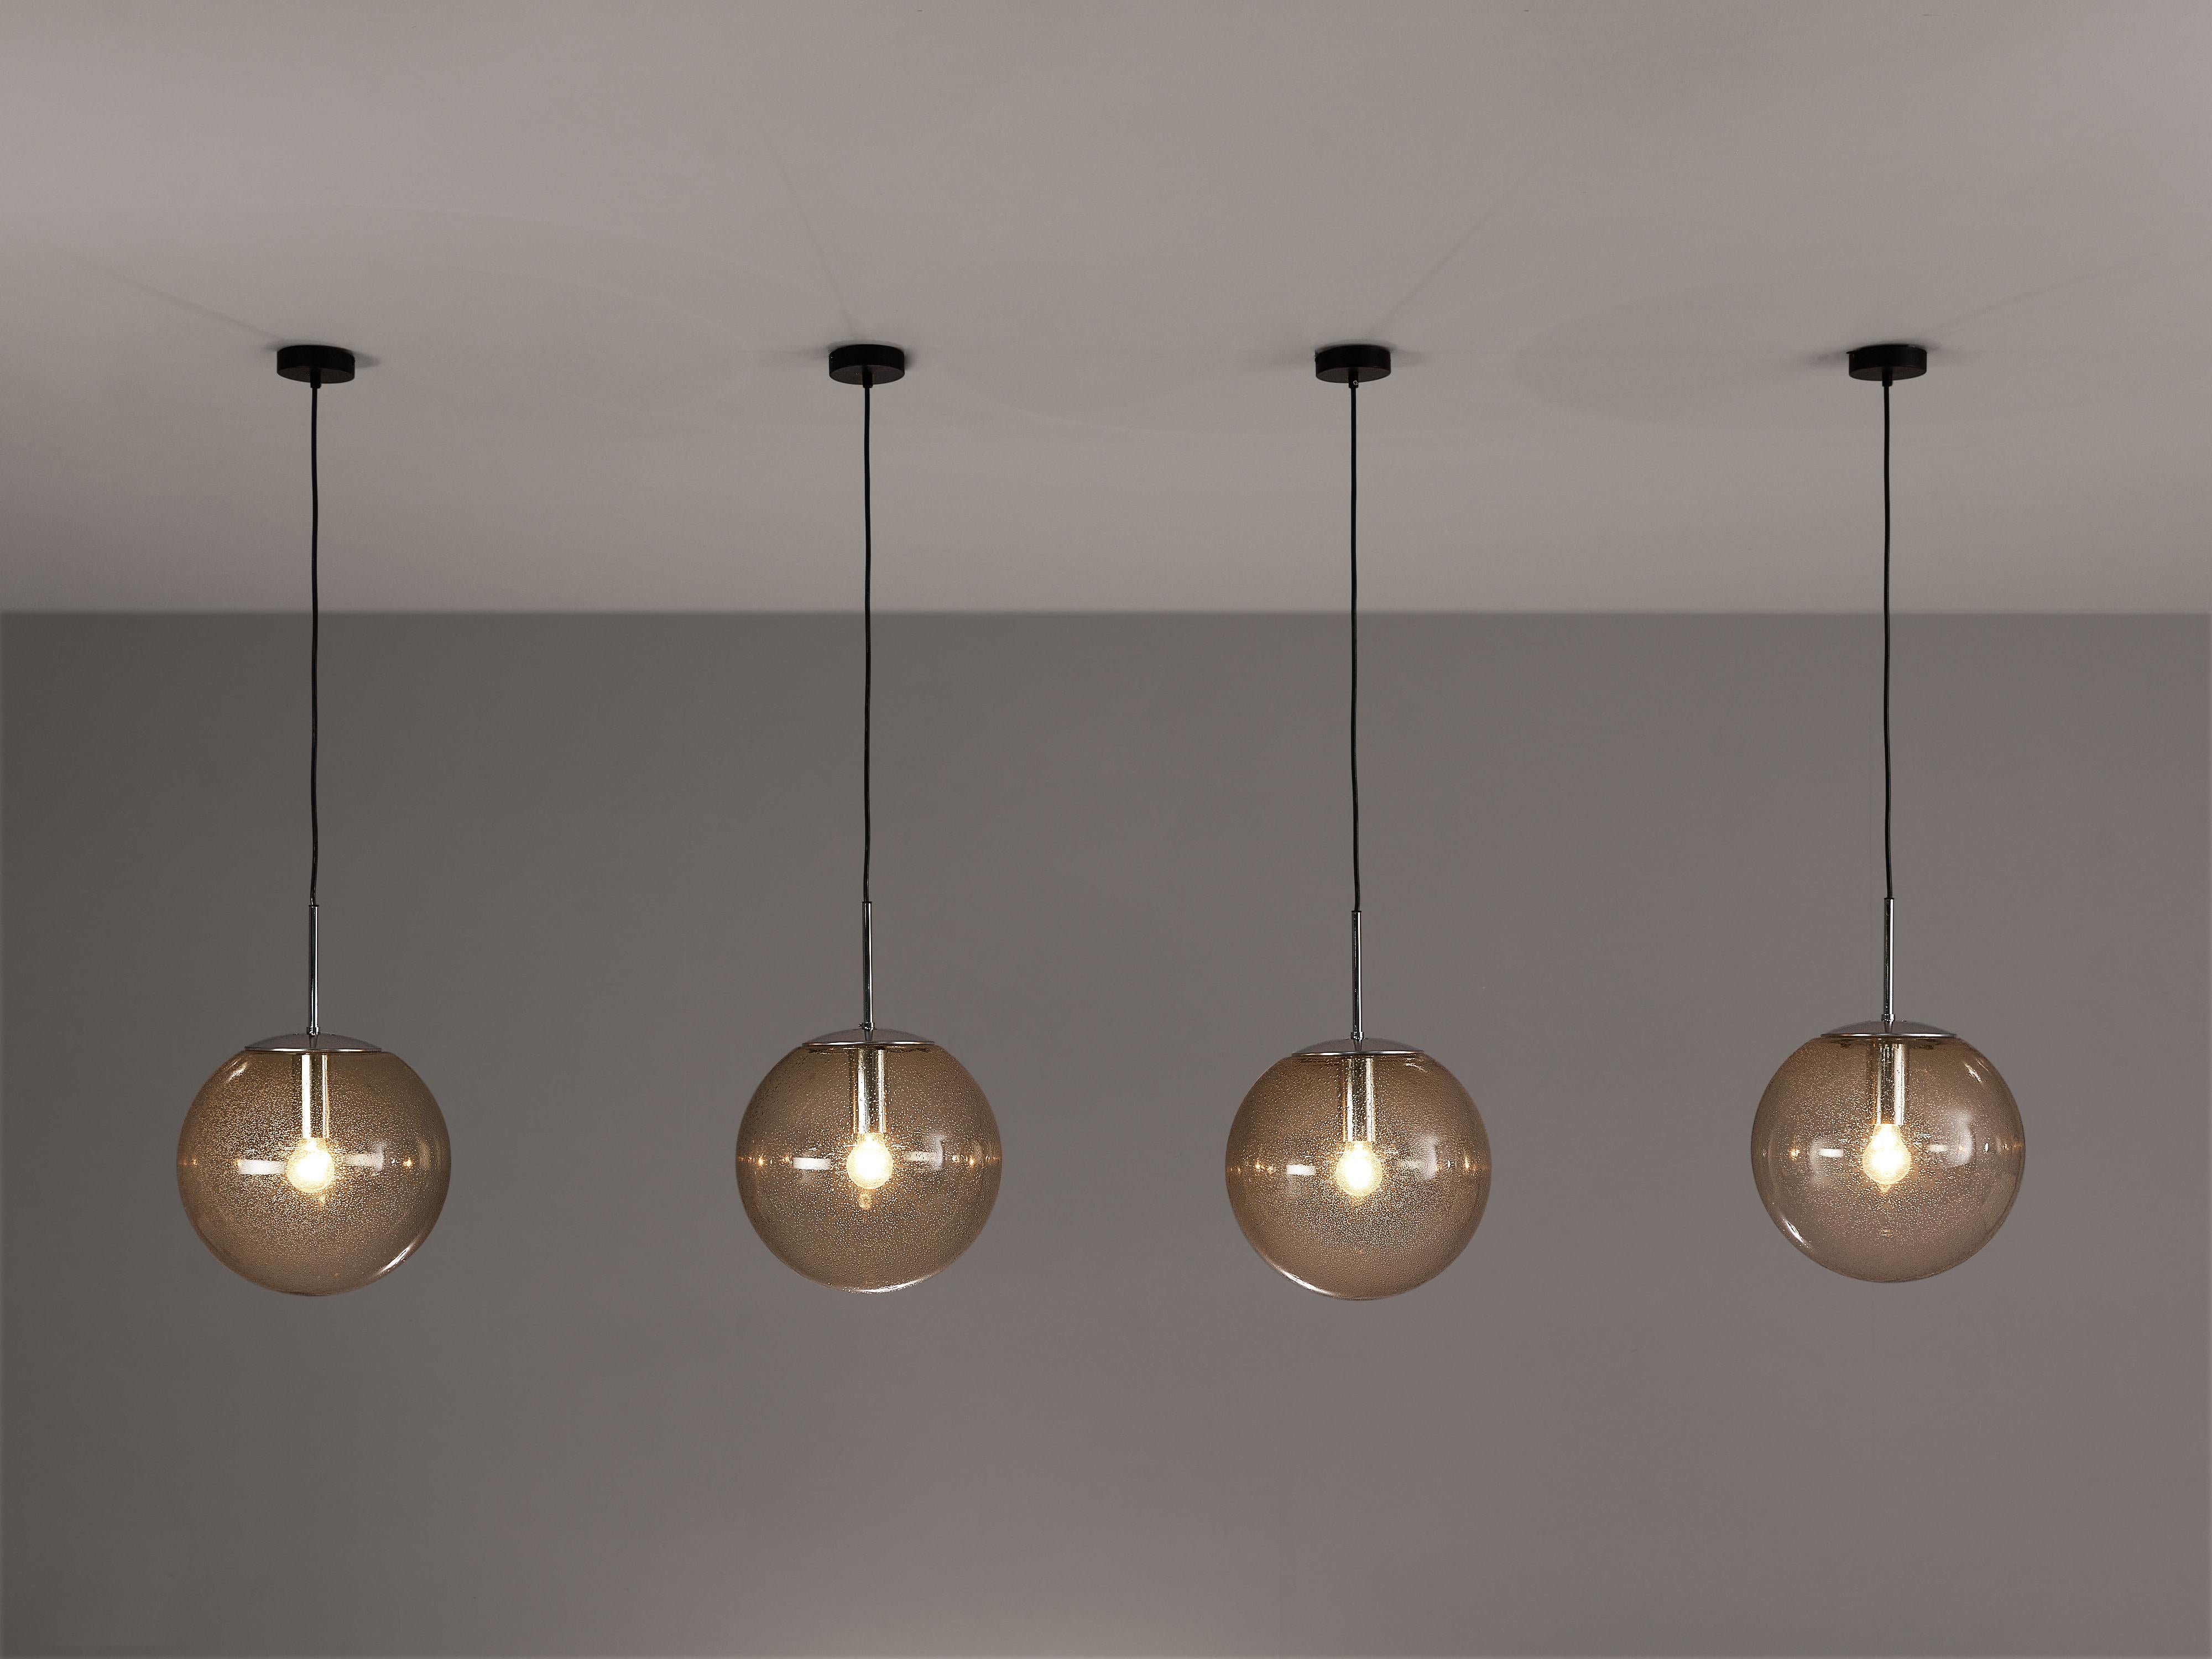 Pendants, smoked glass, chrome-plated metal, Europe, 1970s 

Set of blown glass pendants with multiple bubbles visible in the smoked glass orb. It not only gives the shade a playful appearance, it also creates a sparkling light partition. Another